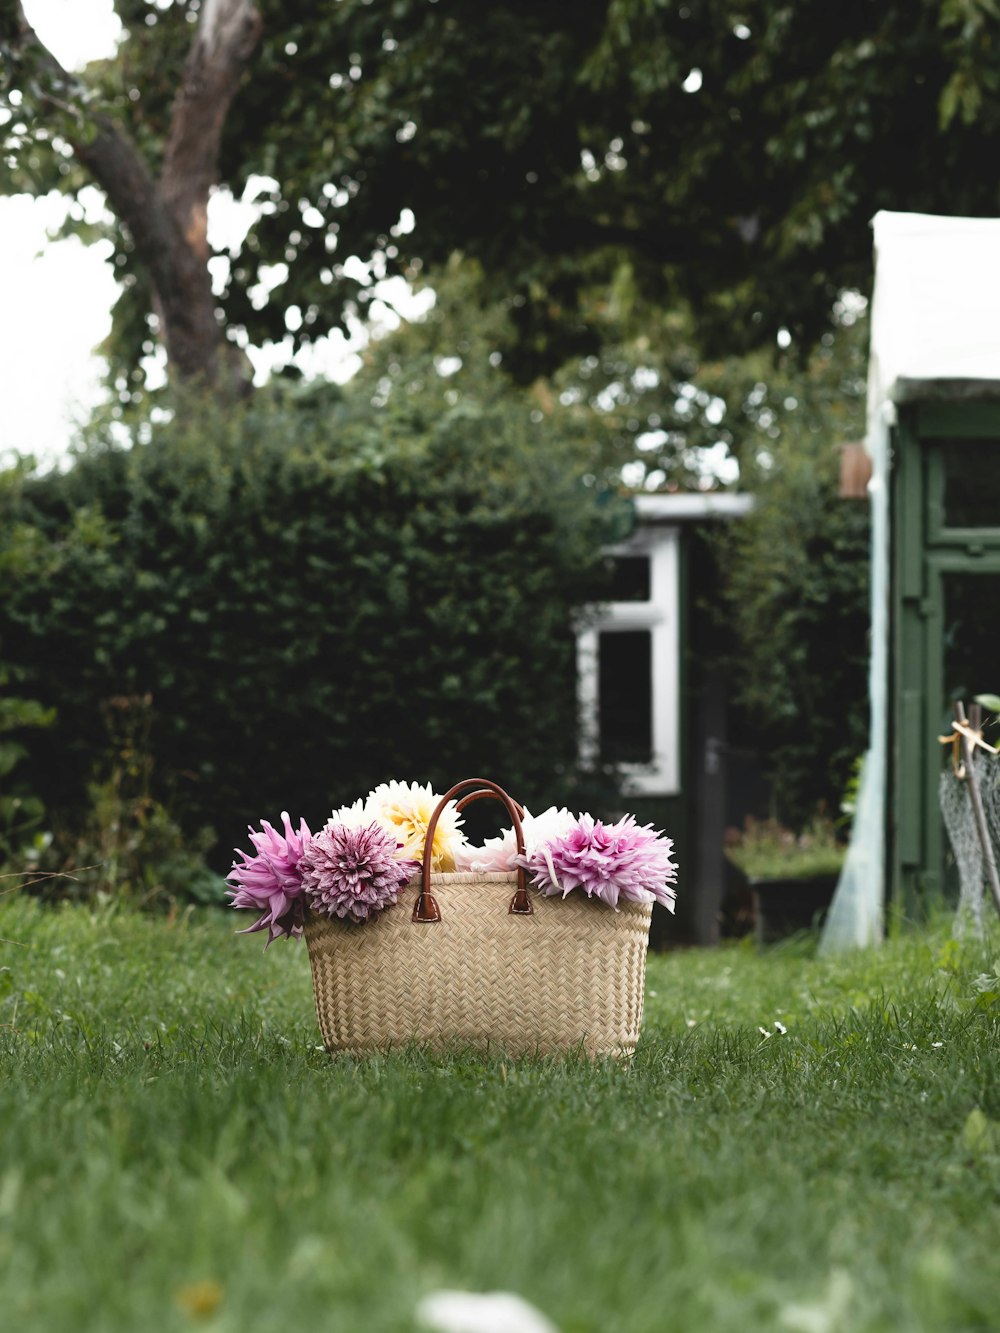 a basket with flowers in it sitting in the grass